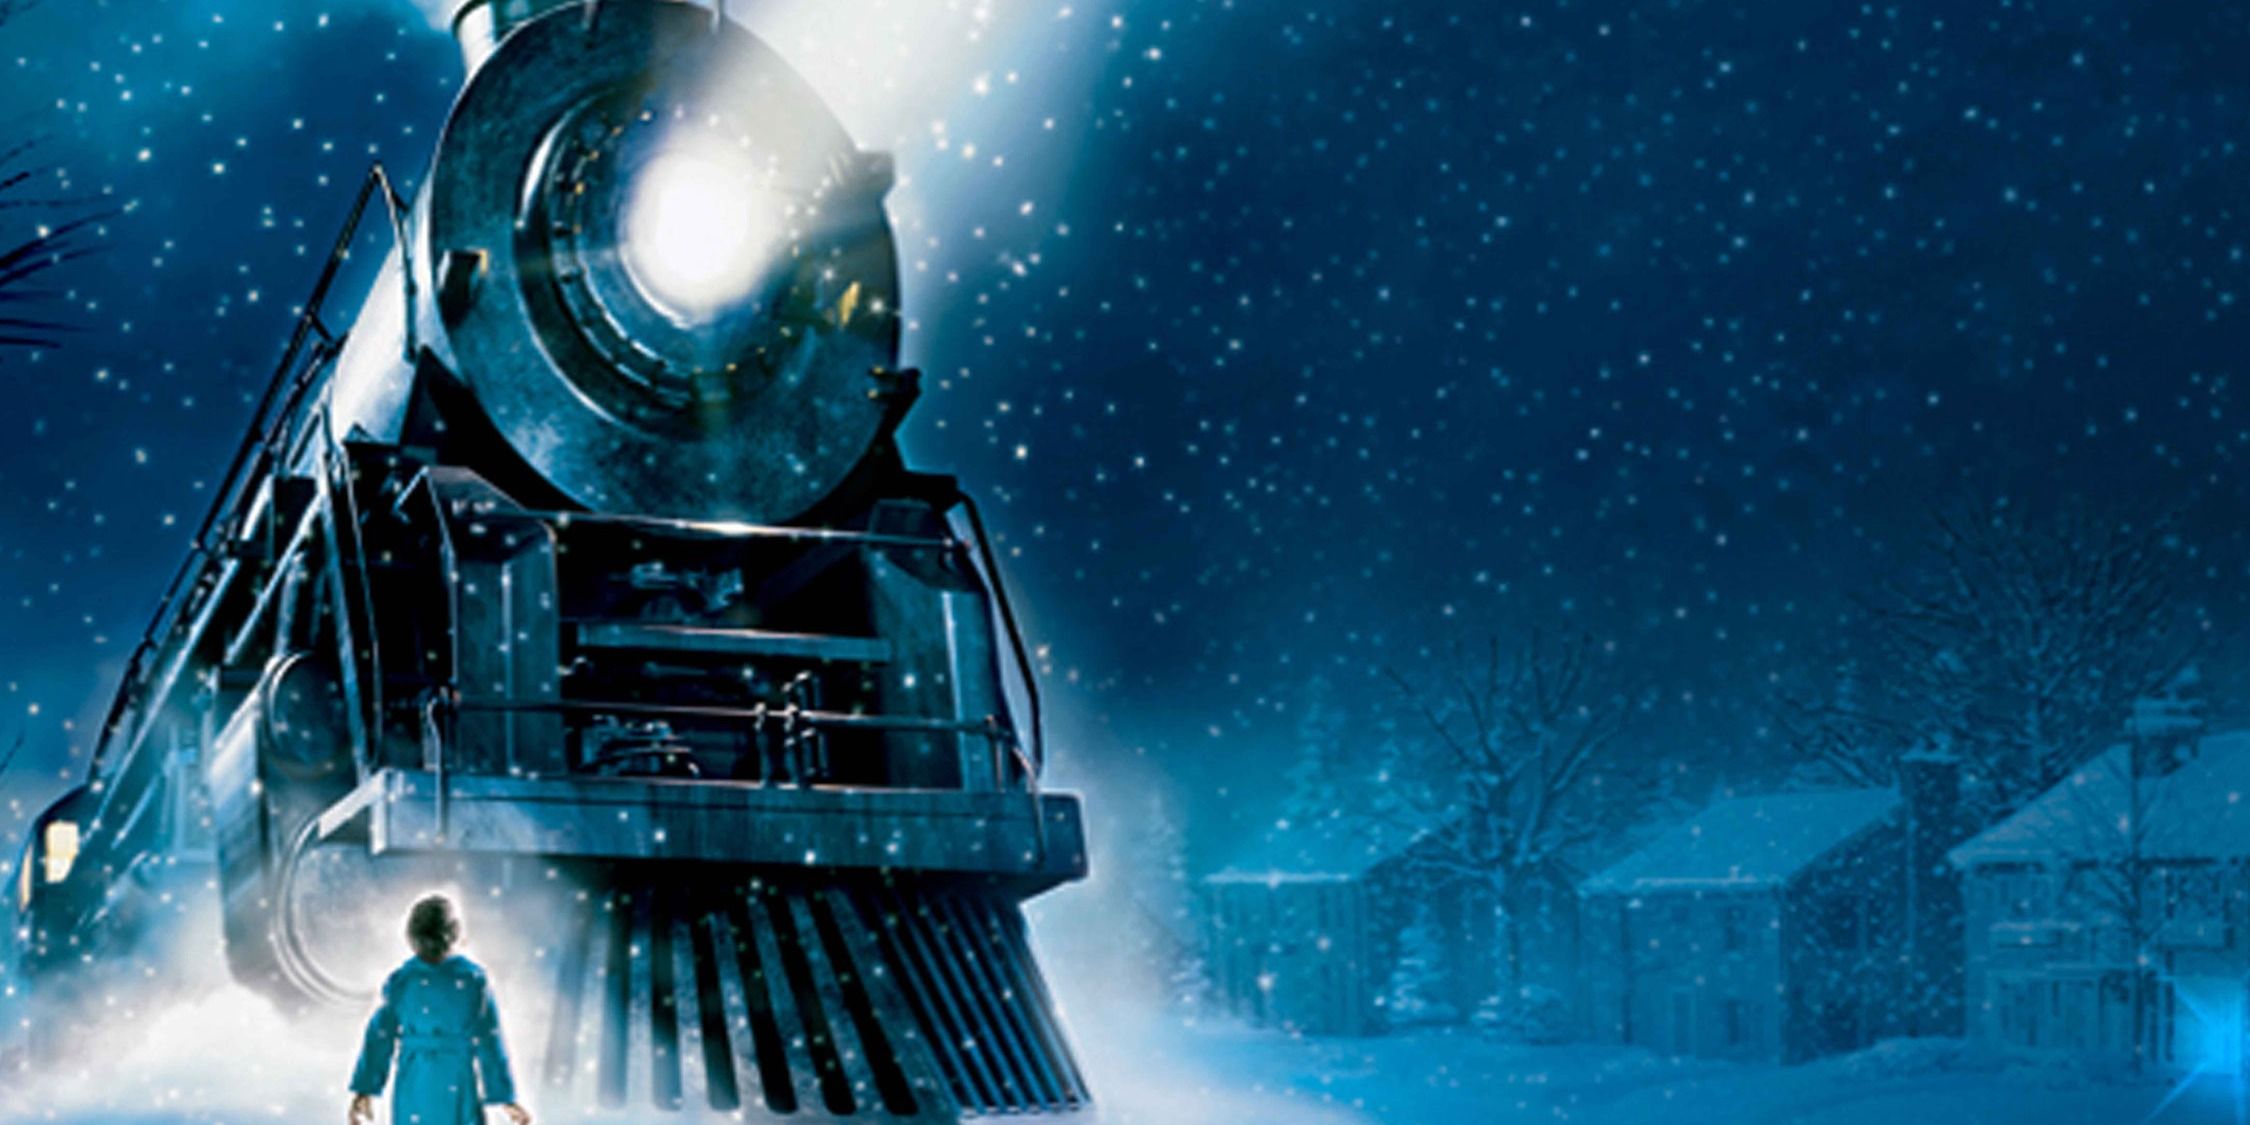 10 Christmas Movies For Fans Of Home Alone